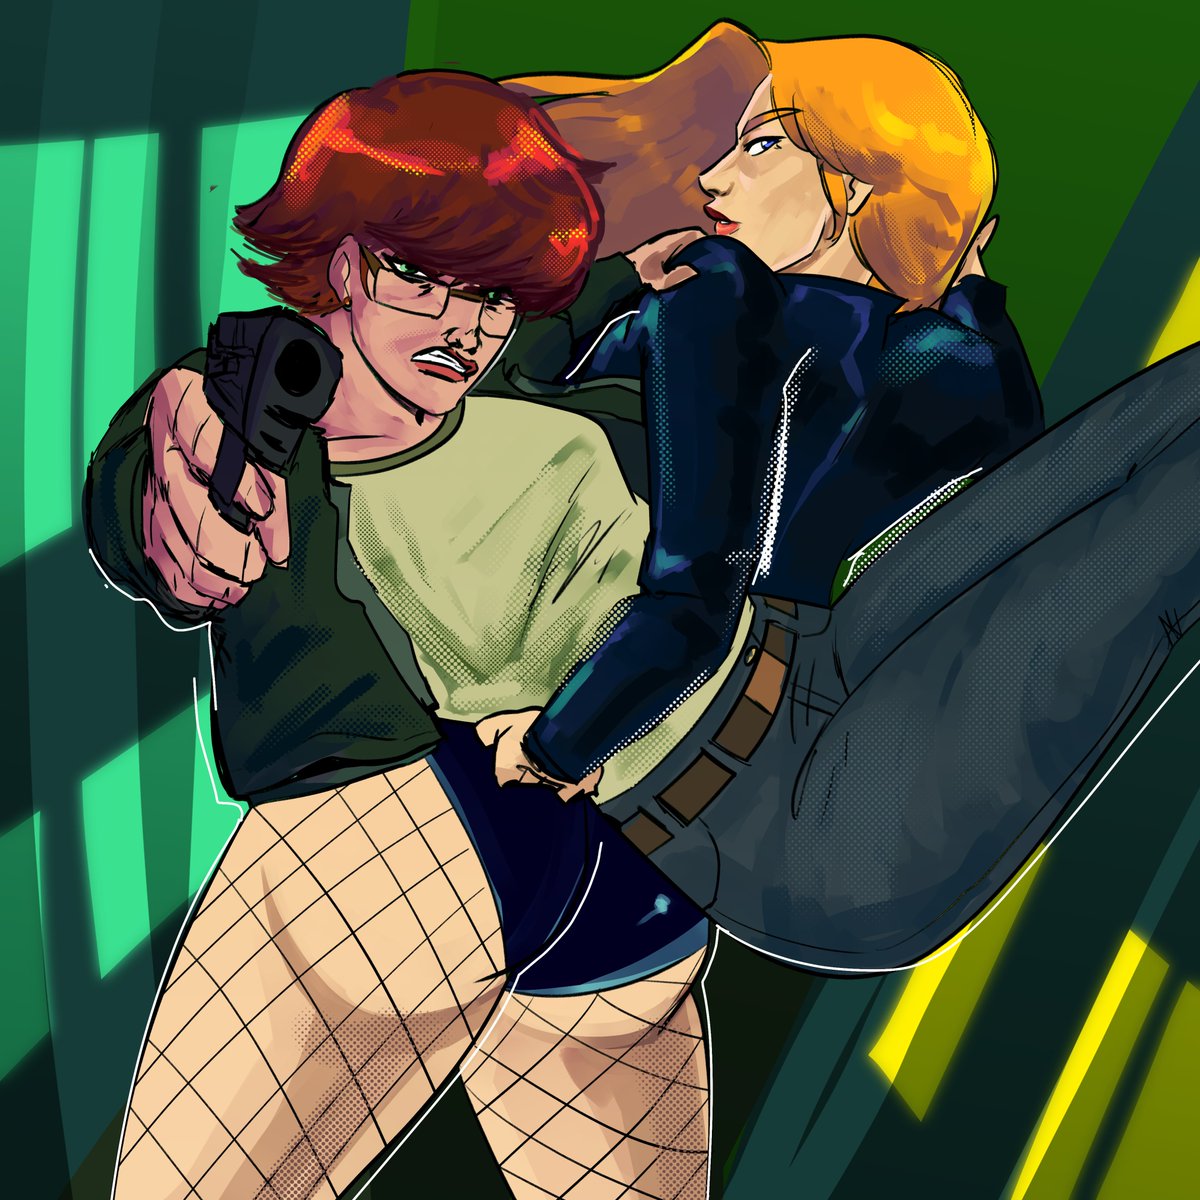 Its the gay girls ever I tried to do a gay cover for them #barbaragordon #dinahlance #oracle #blackcanary #dccomics